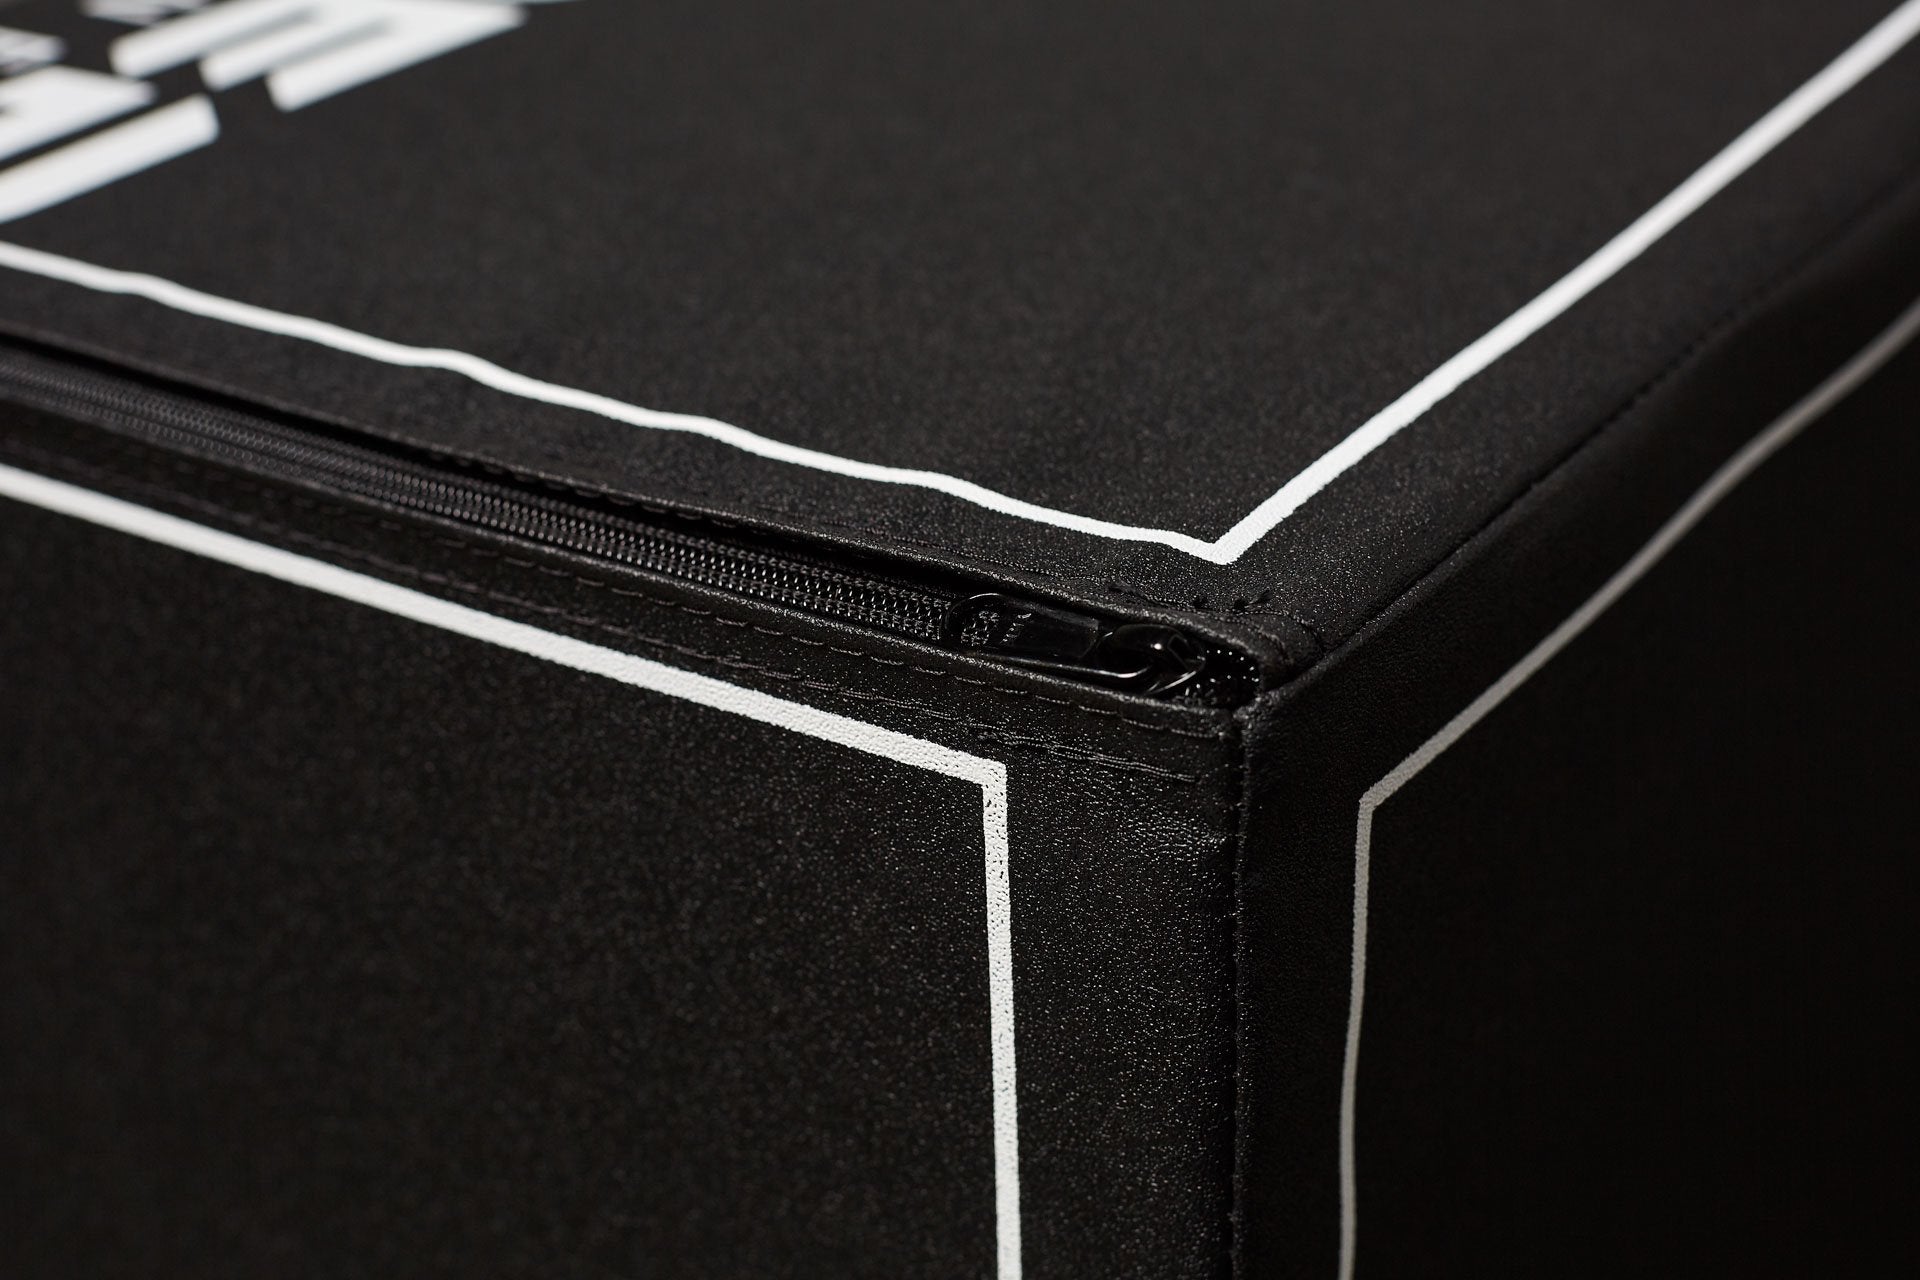 Close-up view of the cover material and zipper of REP's 3-in-1 Soft Plyo Boxes.